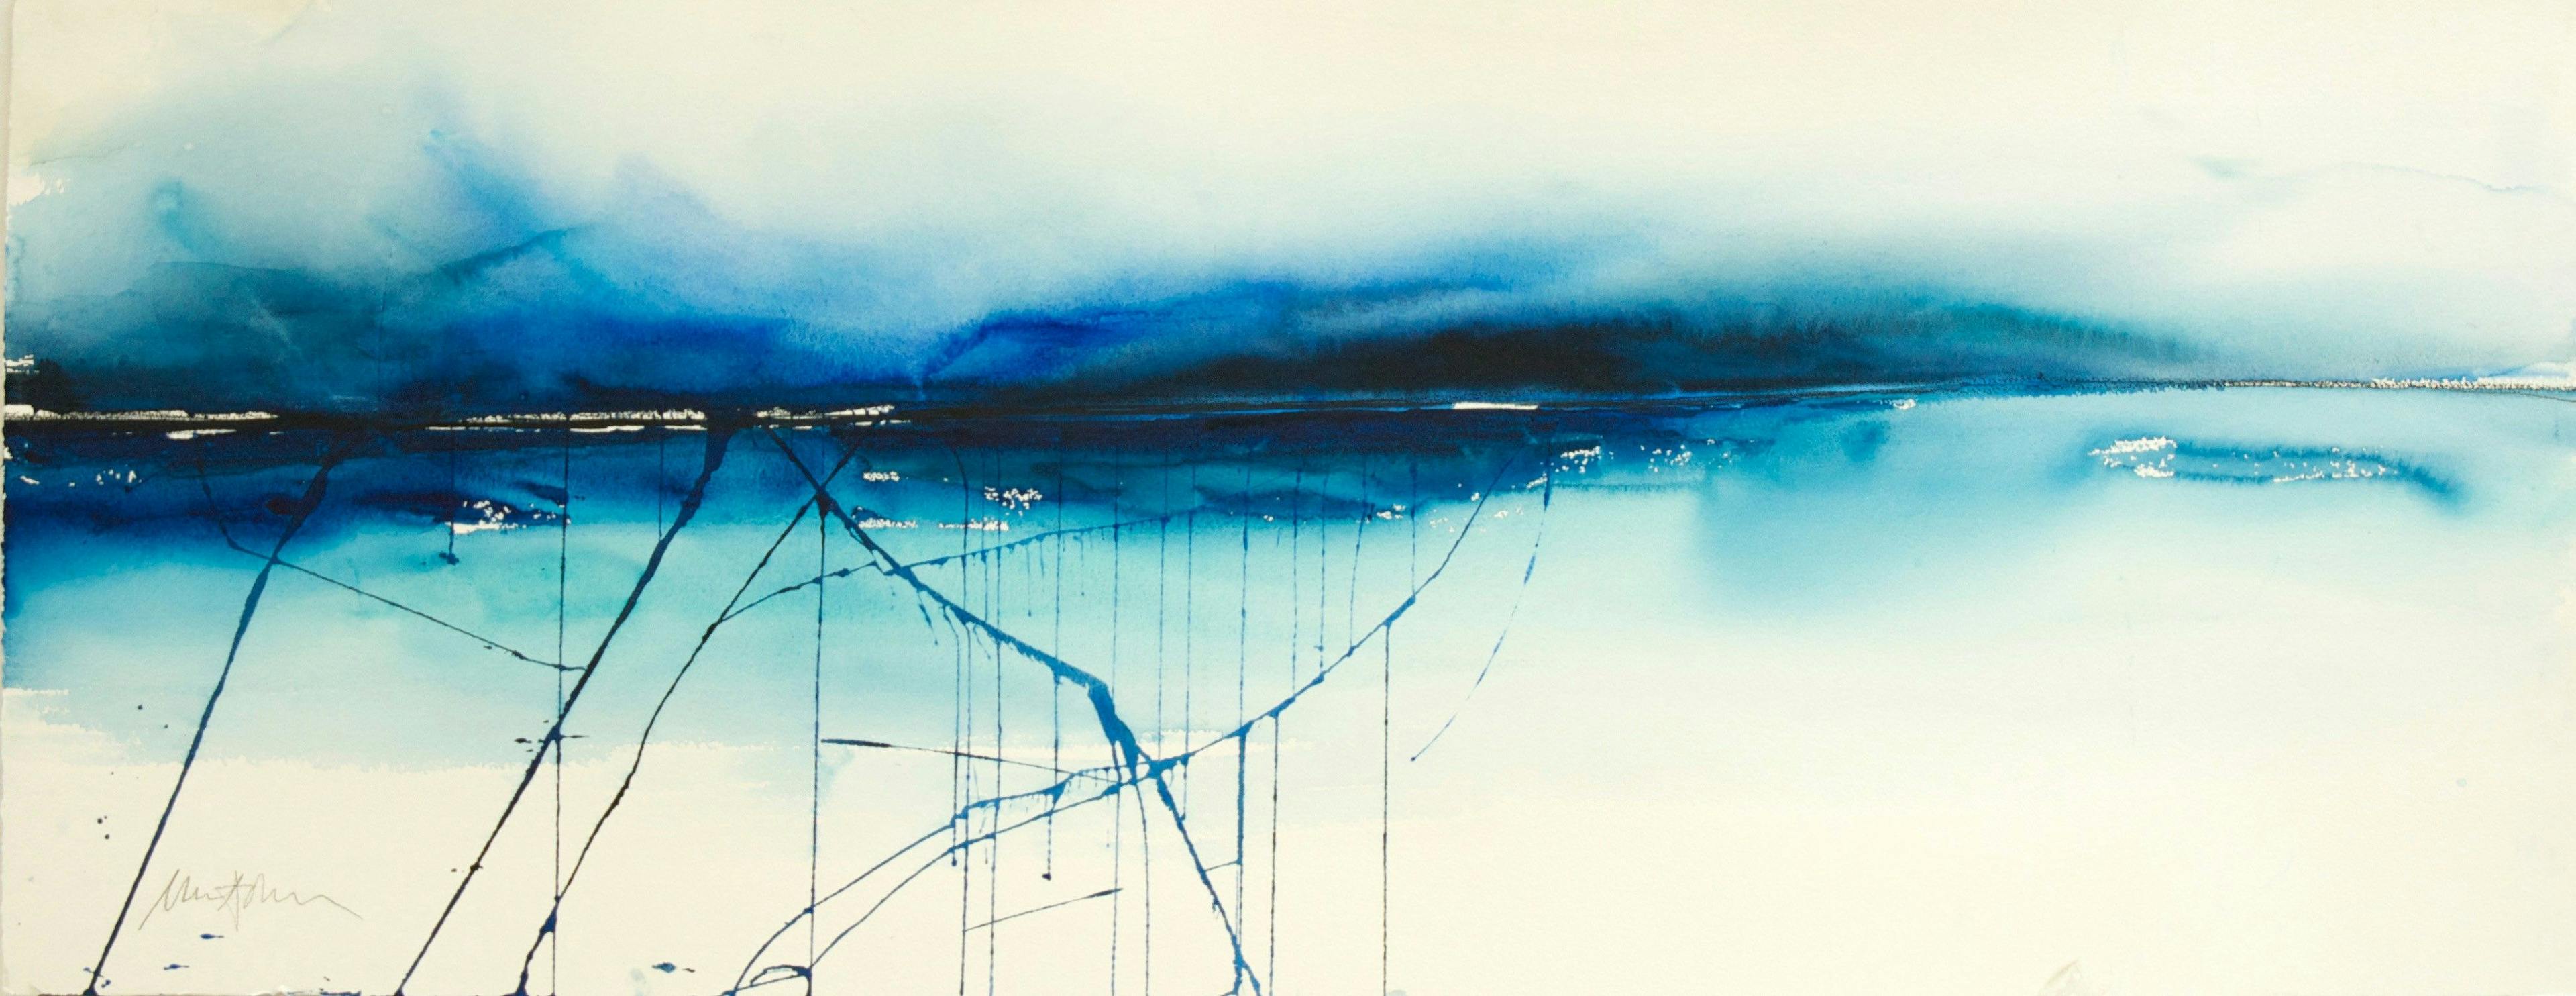 Watercolor by Ulla Ohlson with the title "Haväng", mostly in blue tones